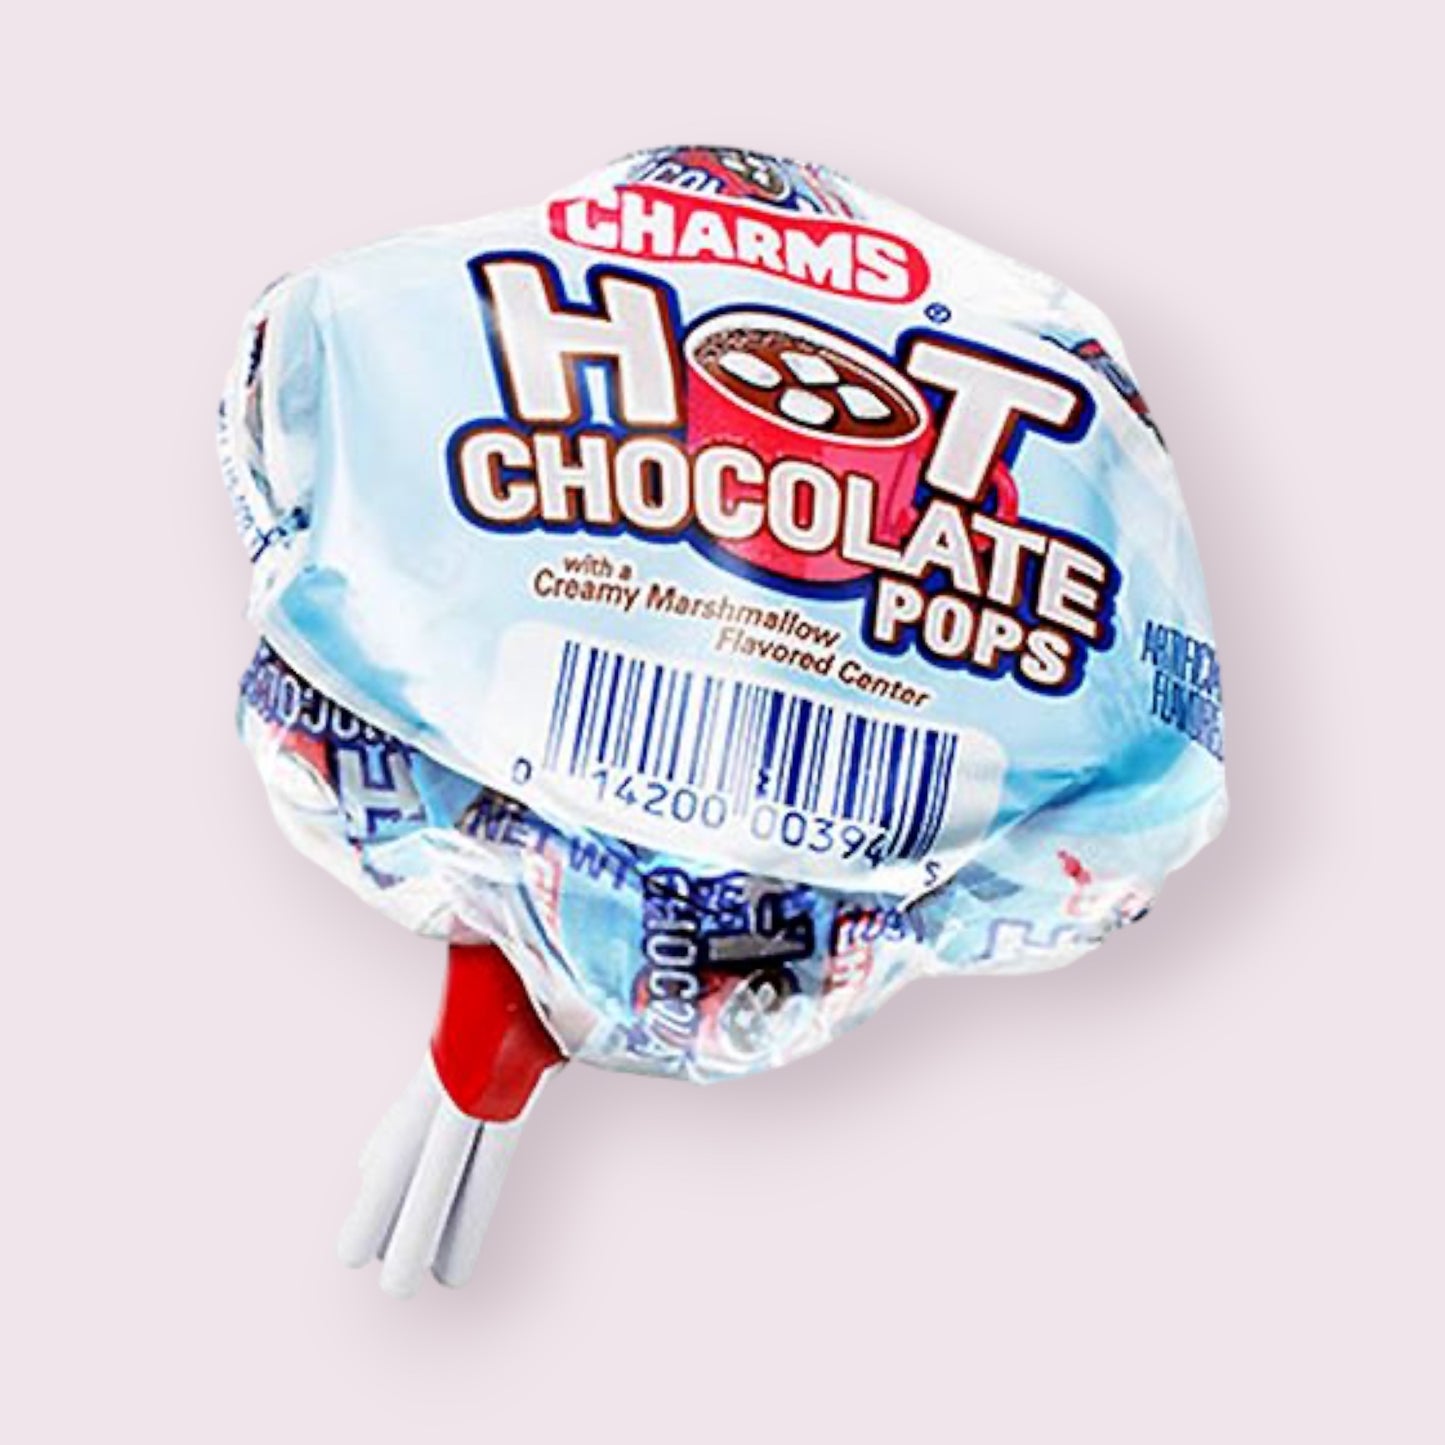 Charms Hot Chocolate Blow Pops bunch  Pixie Candy Shoppe   